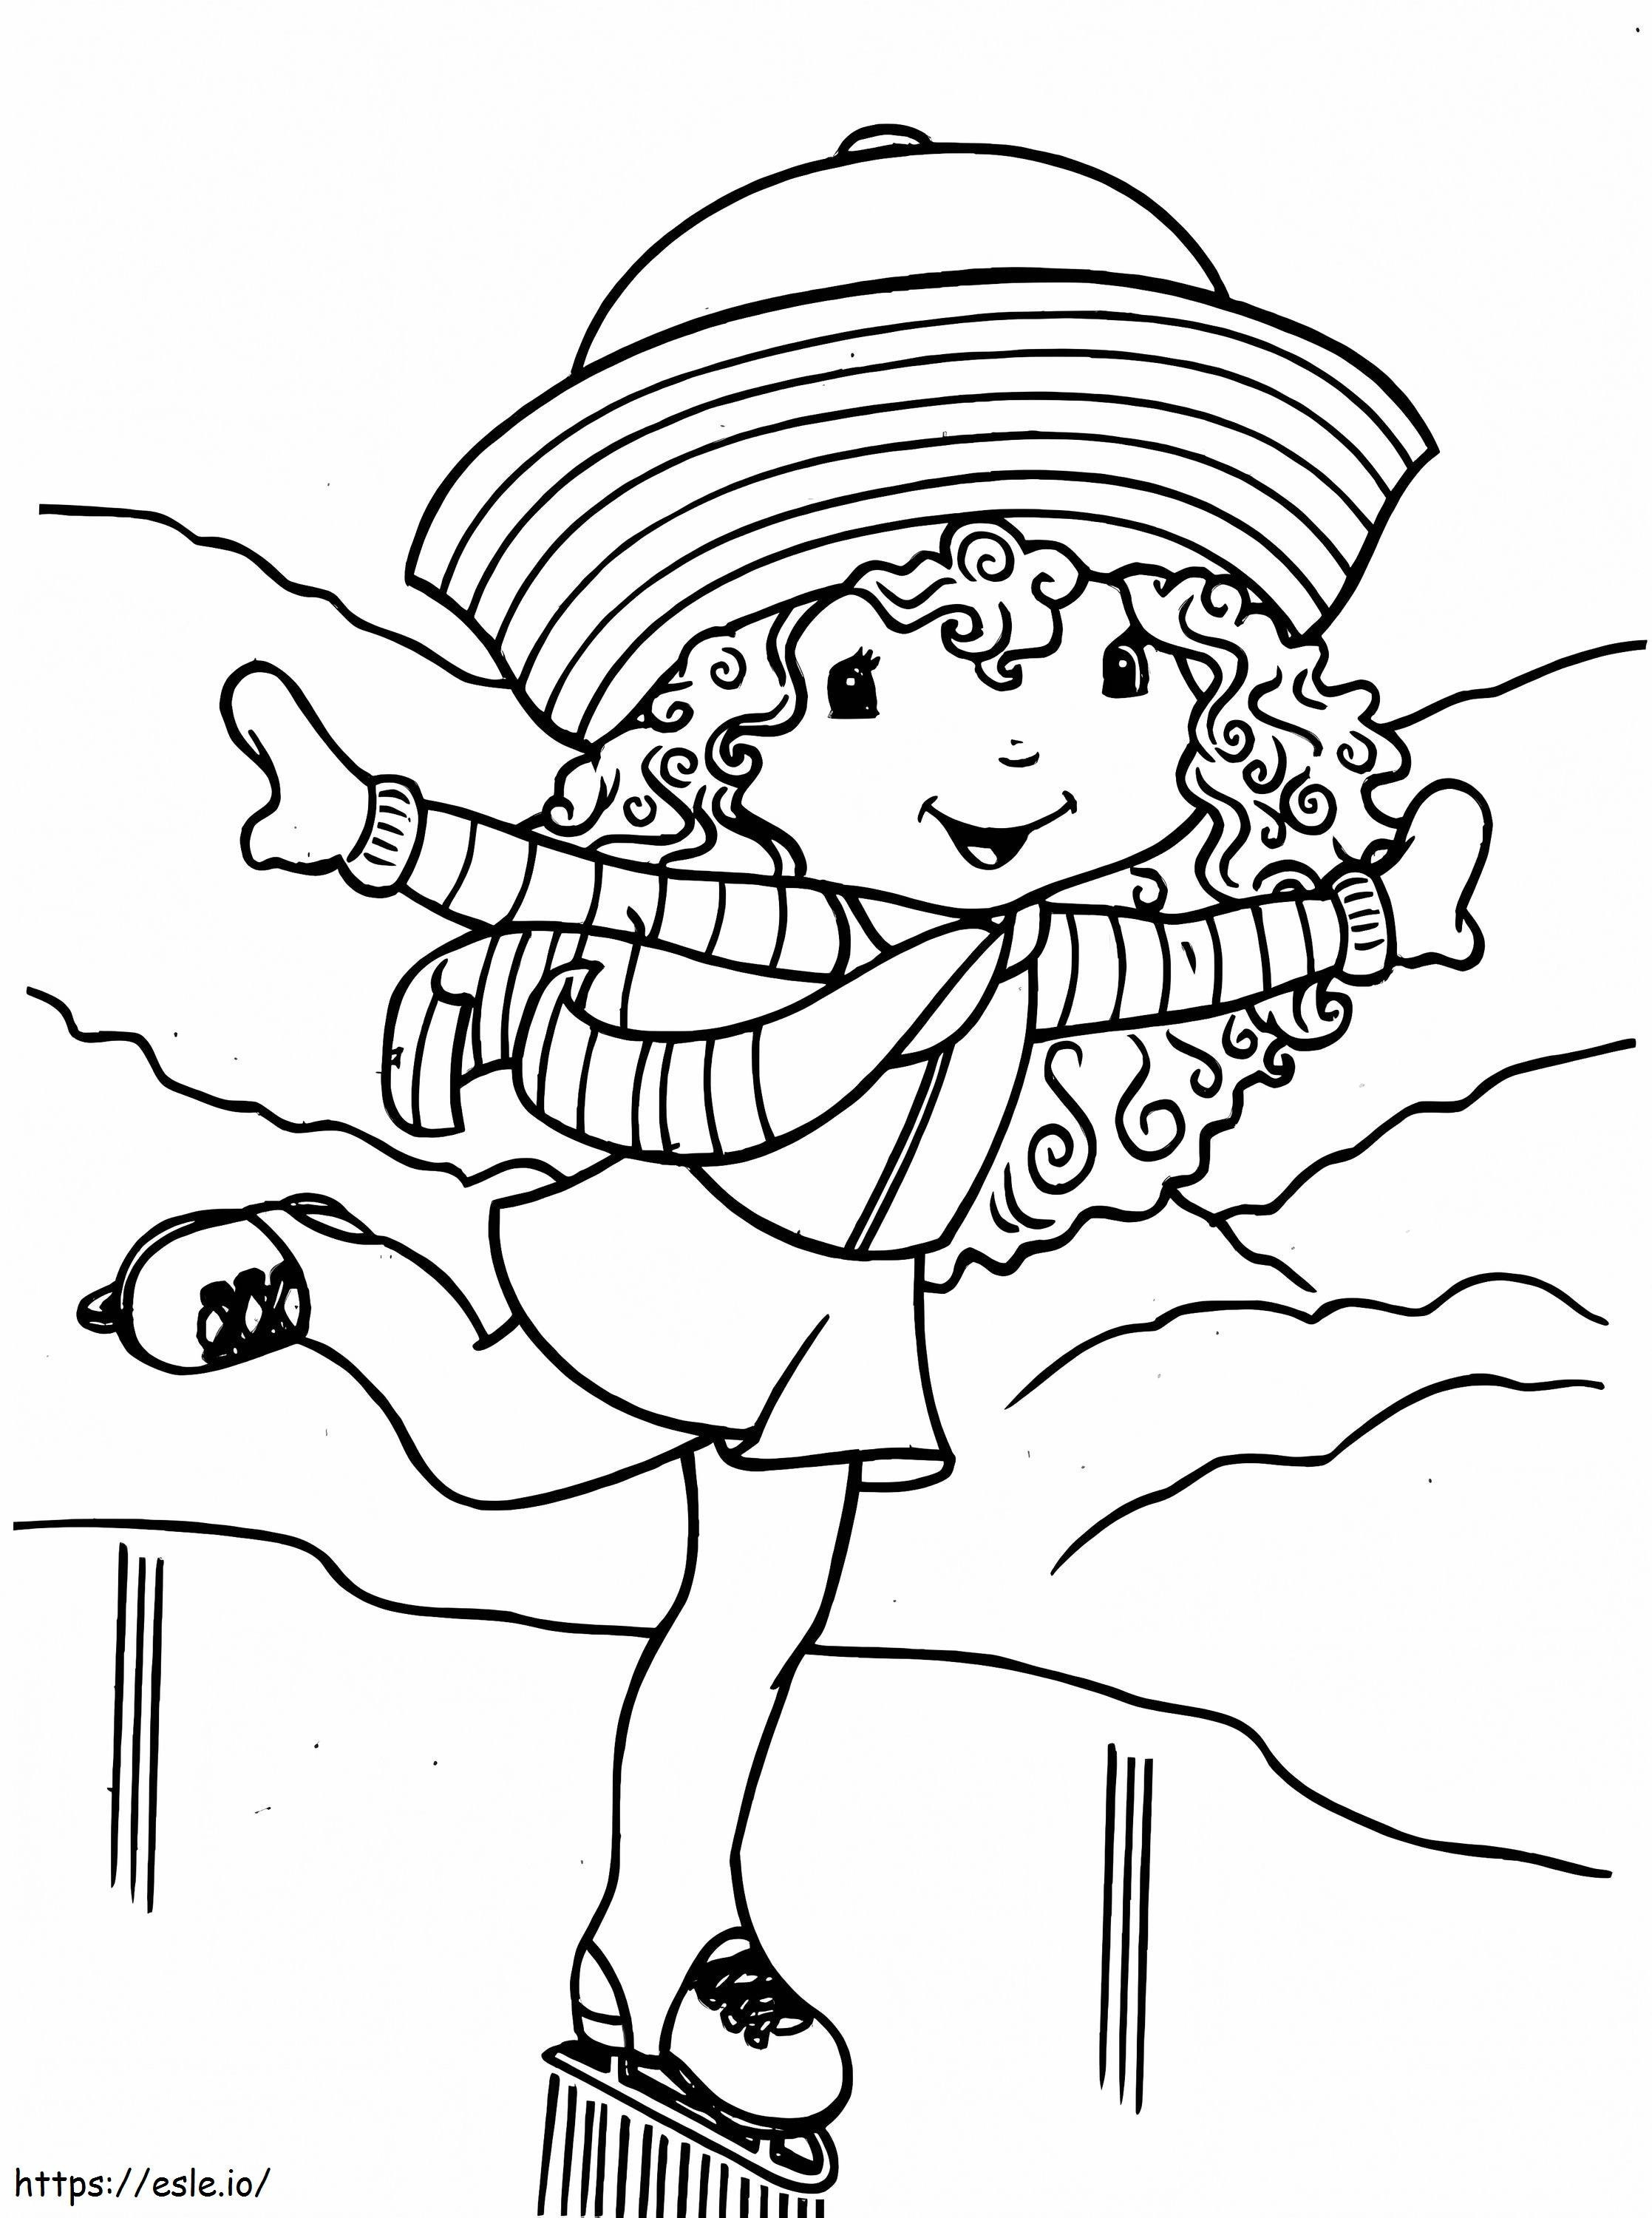 Strawberry Skater Cake coloring page